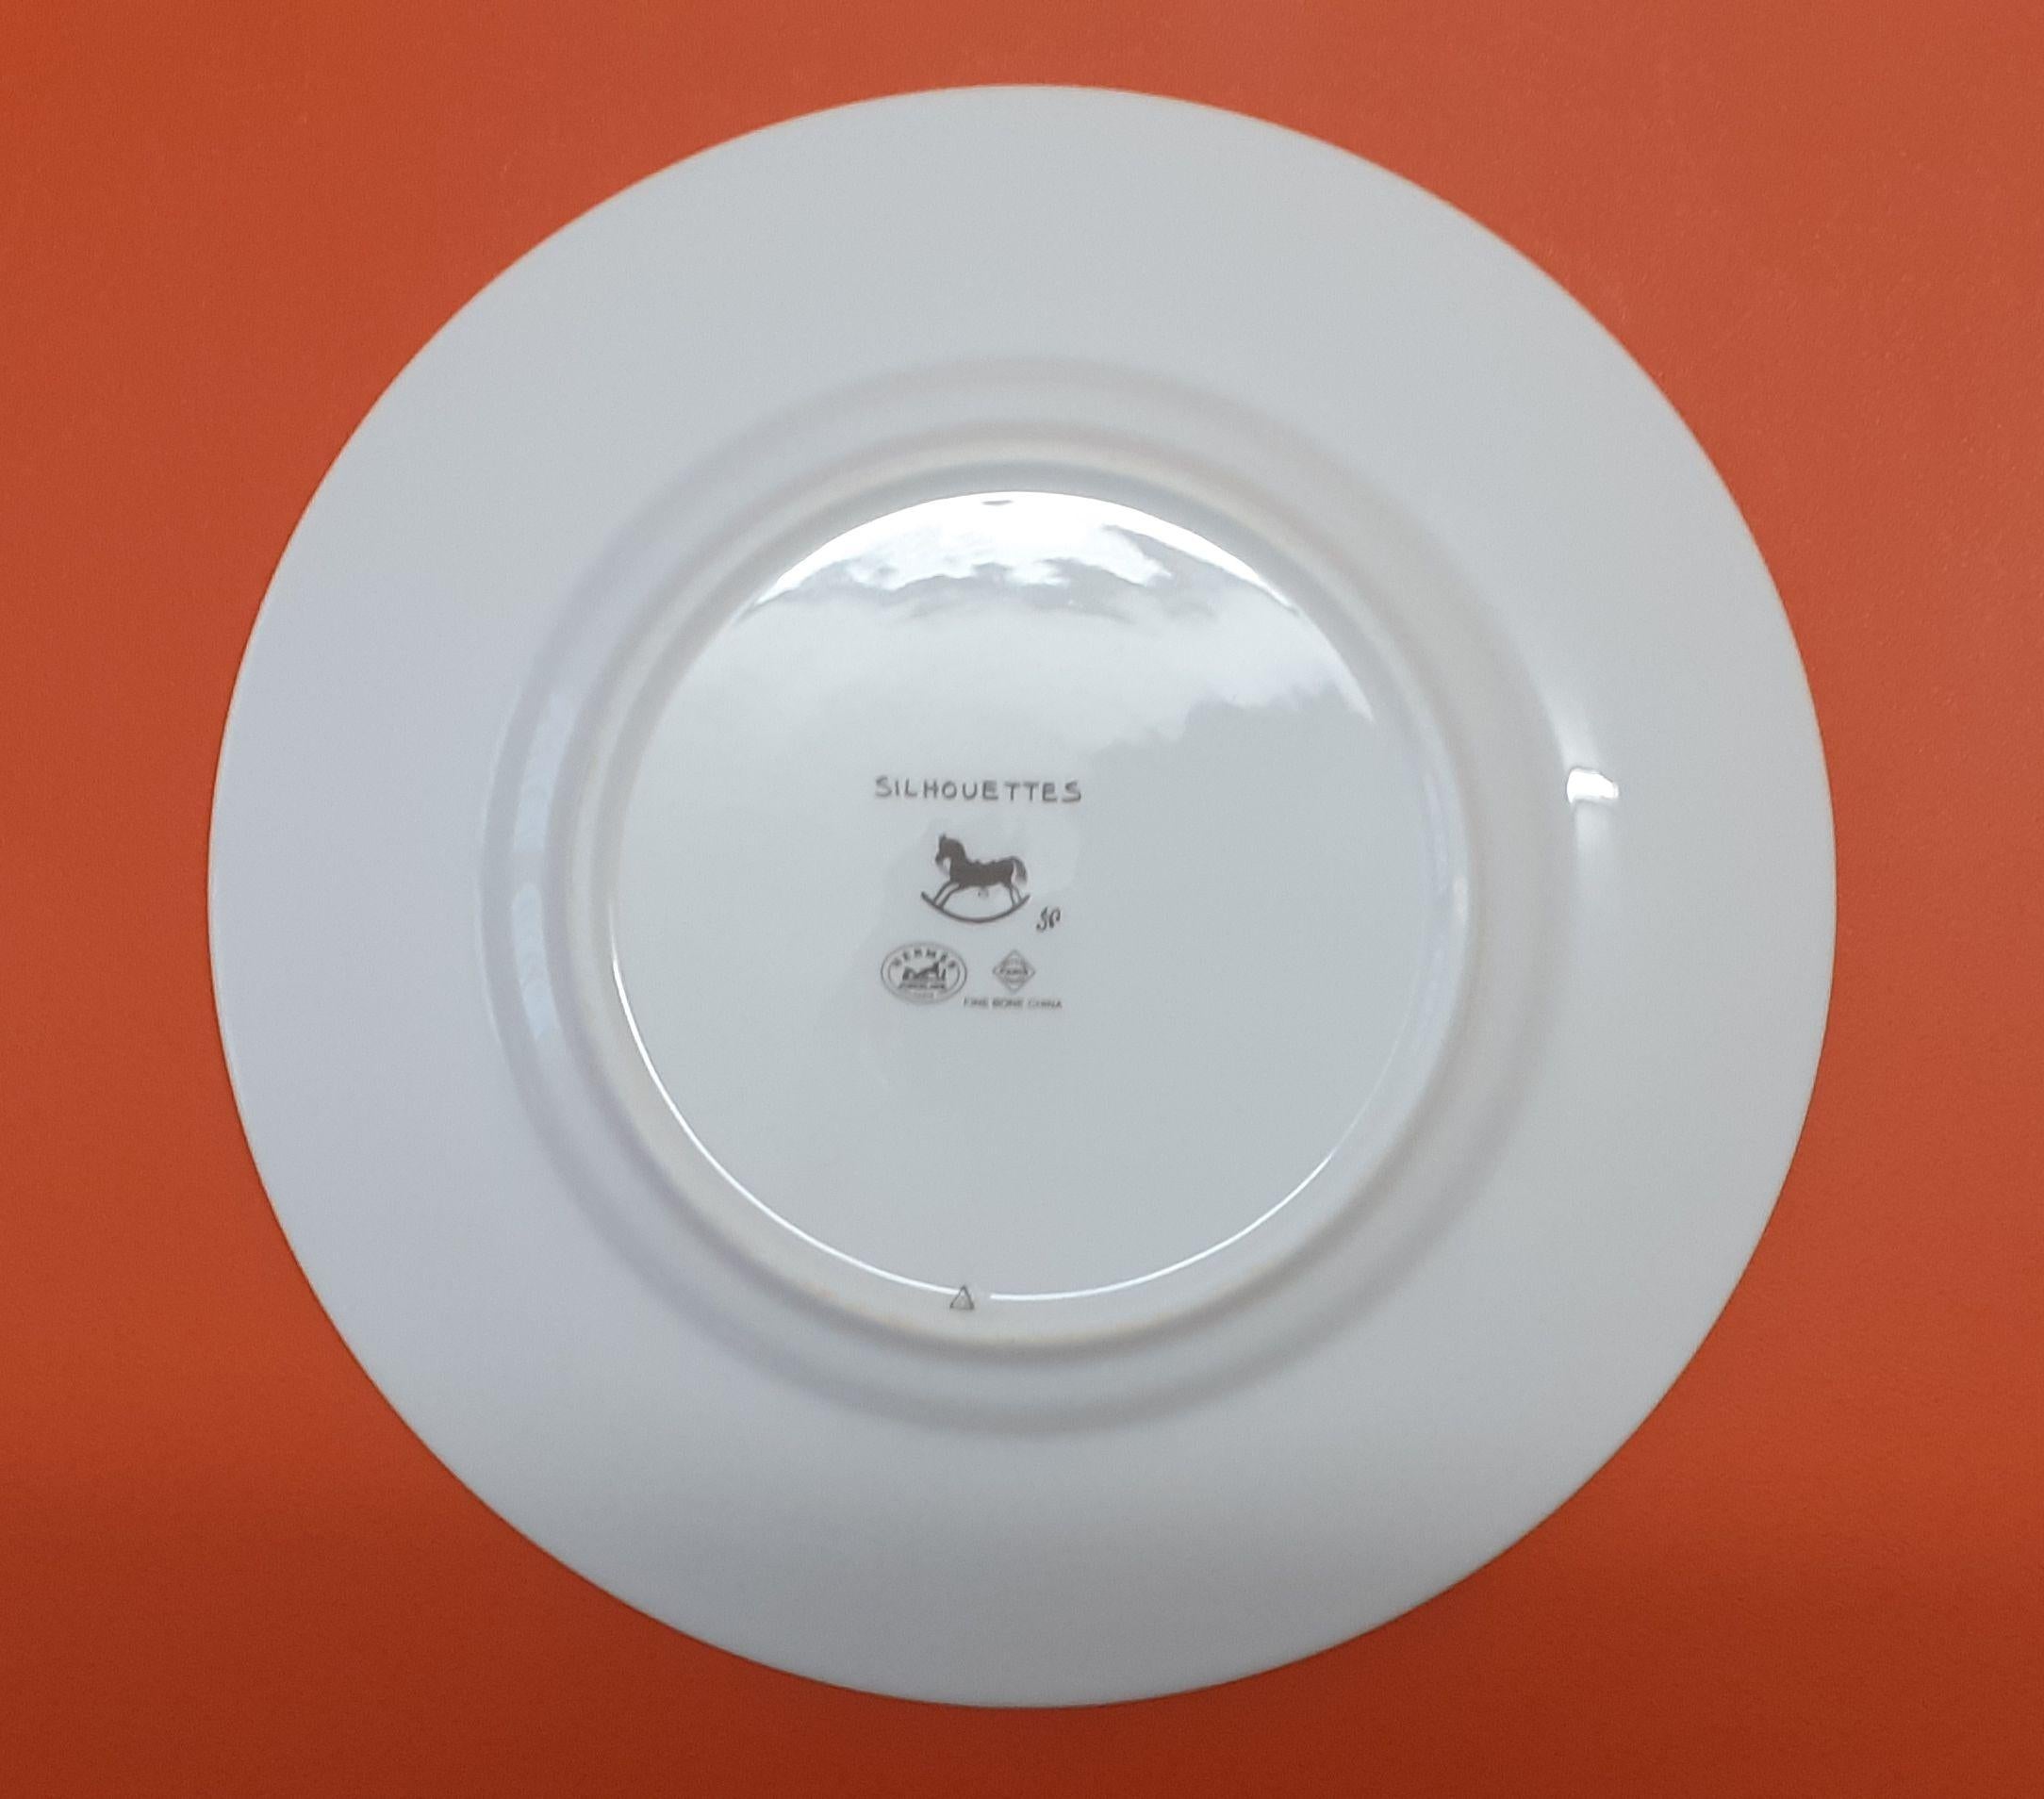 Hermès Set of 2 Plates Sihouettes Collection  For Sale 1